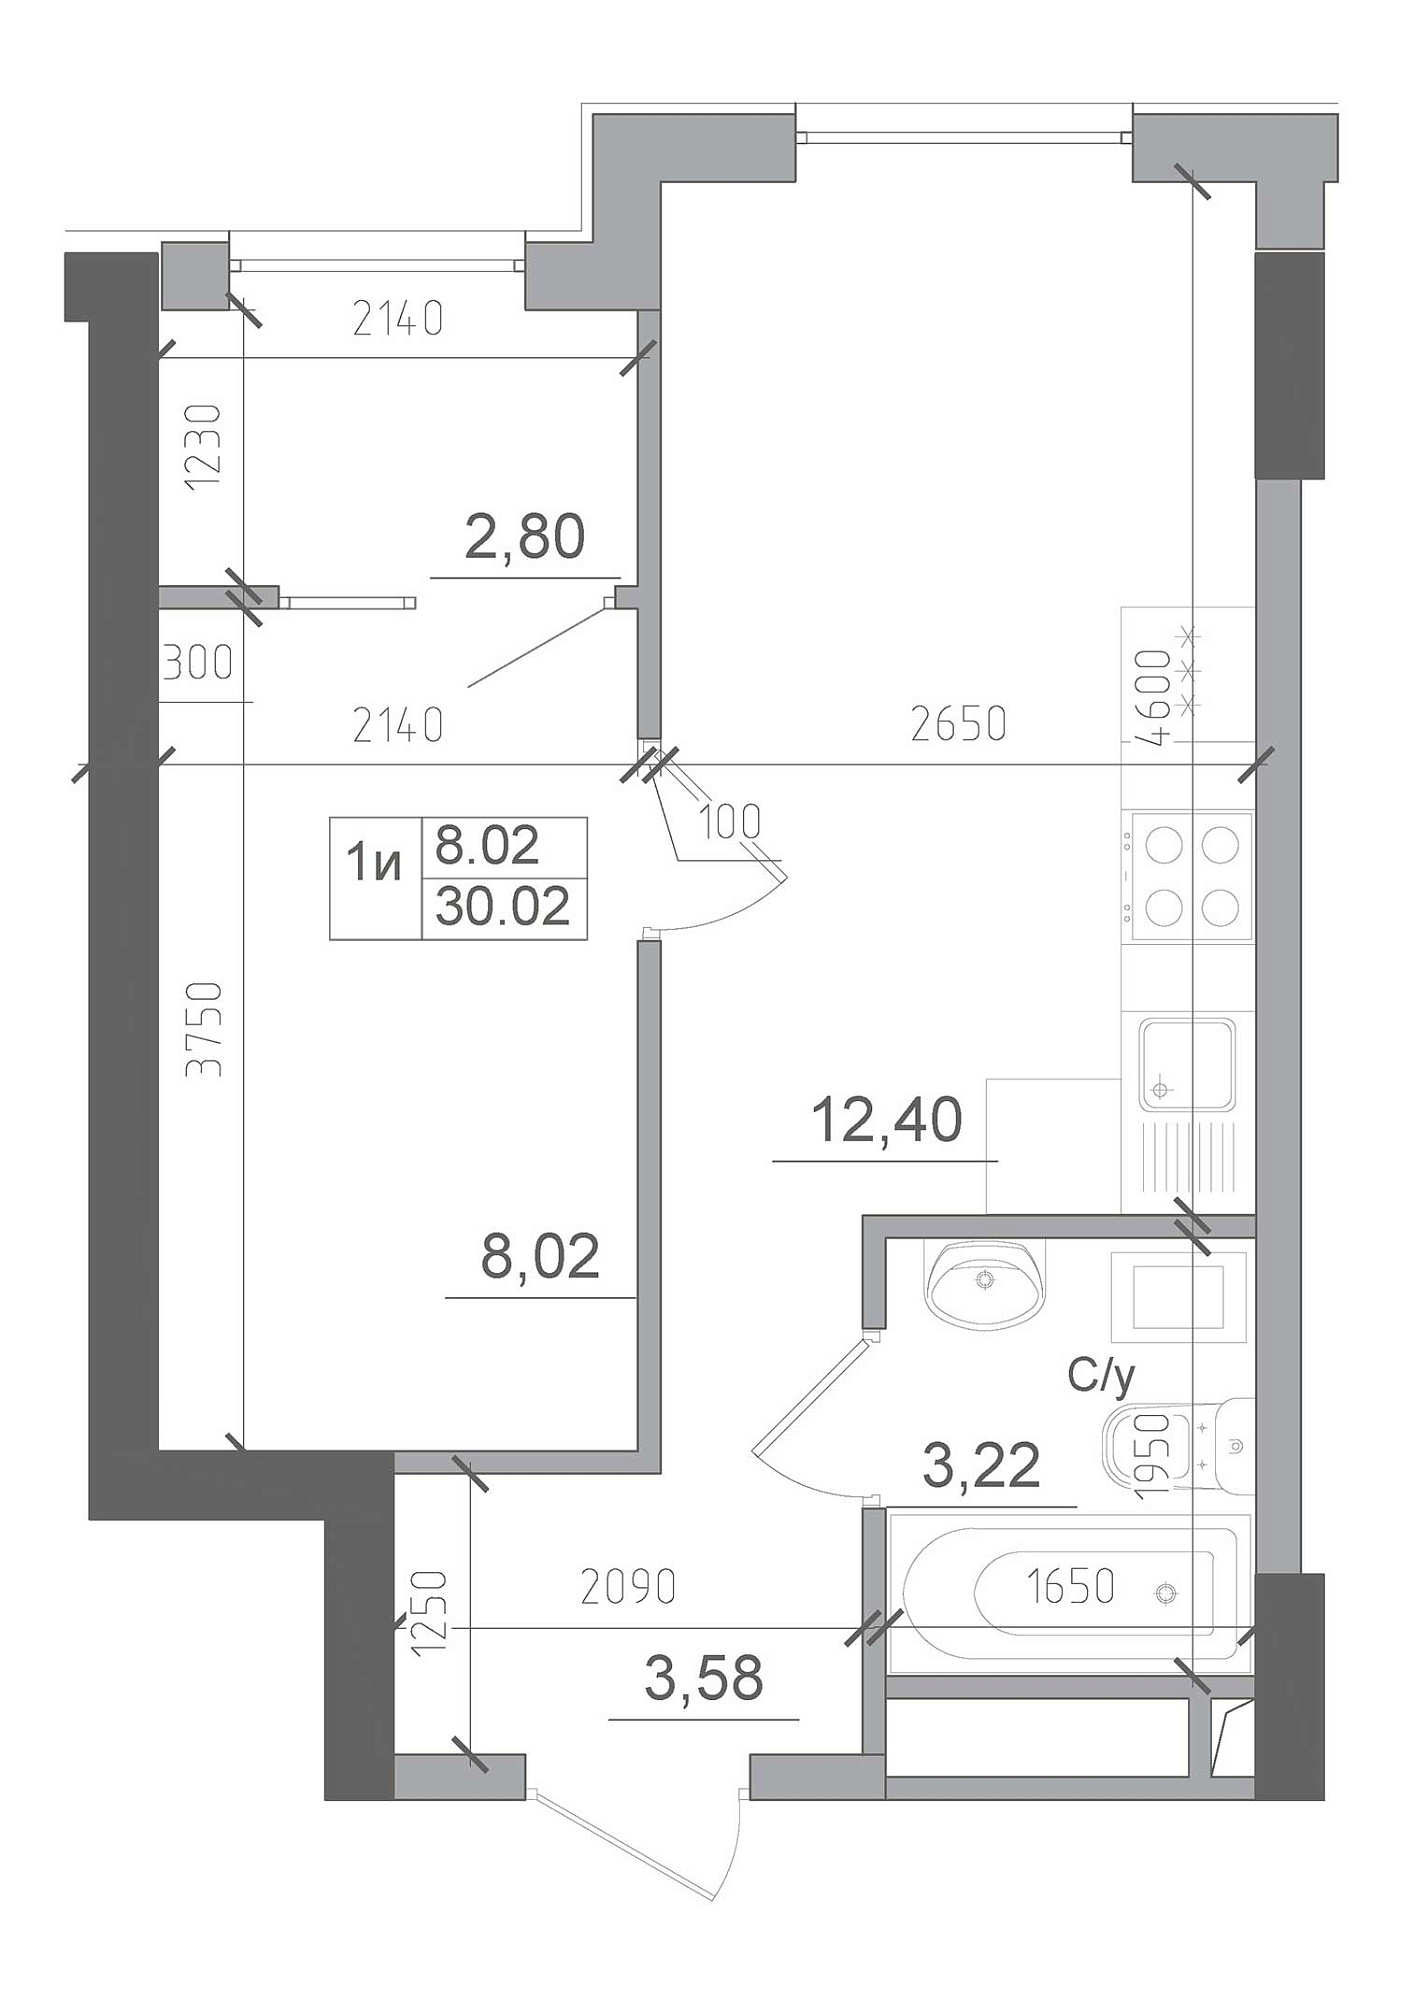 Planning 1-rm flats area 30.02m2, AB-22-02/00014.